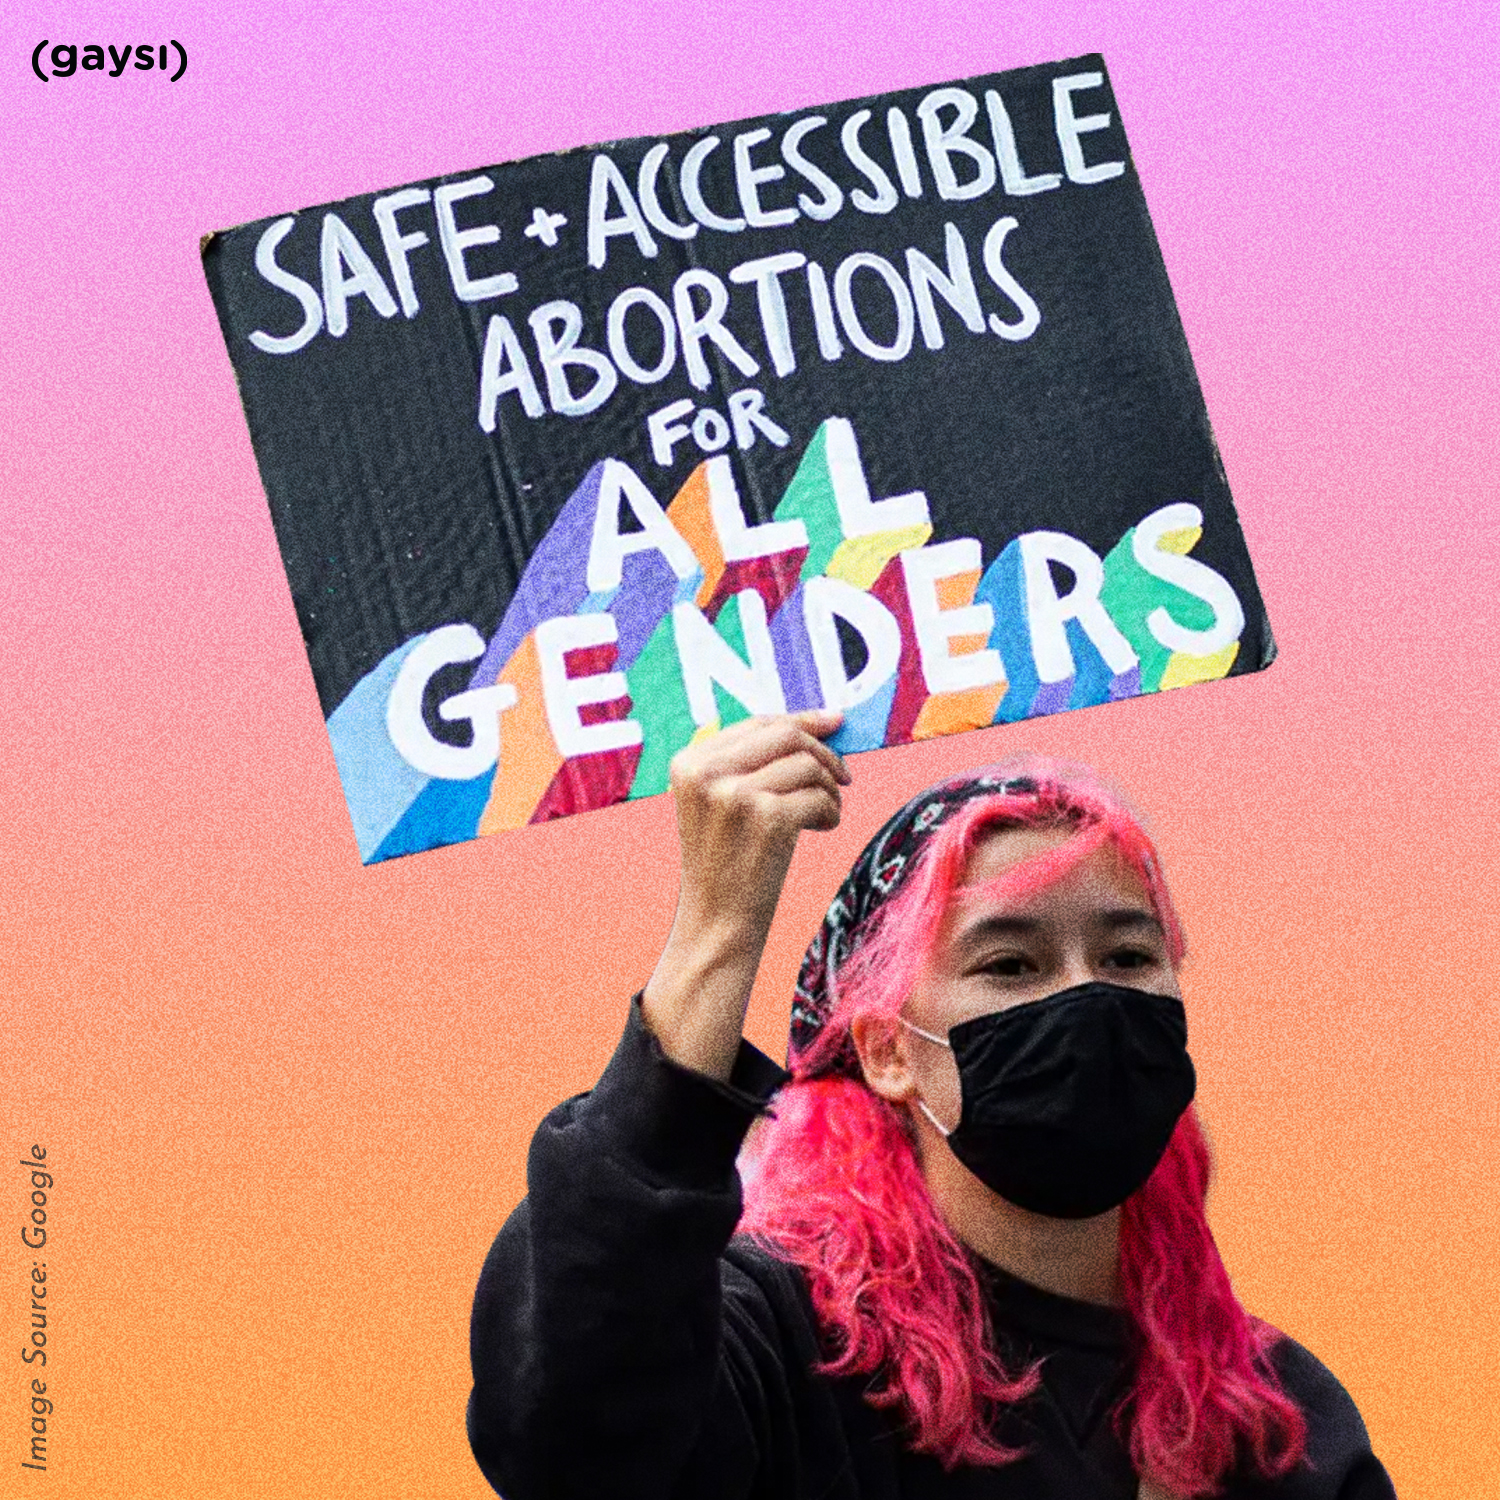 SC: Safe Abortion For All, Including Single Women